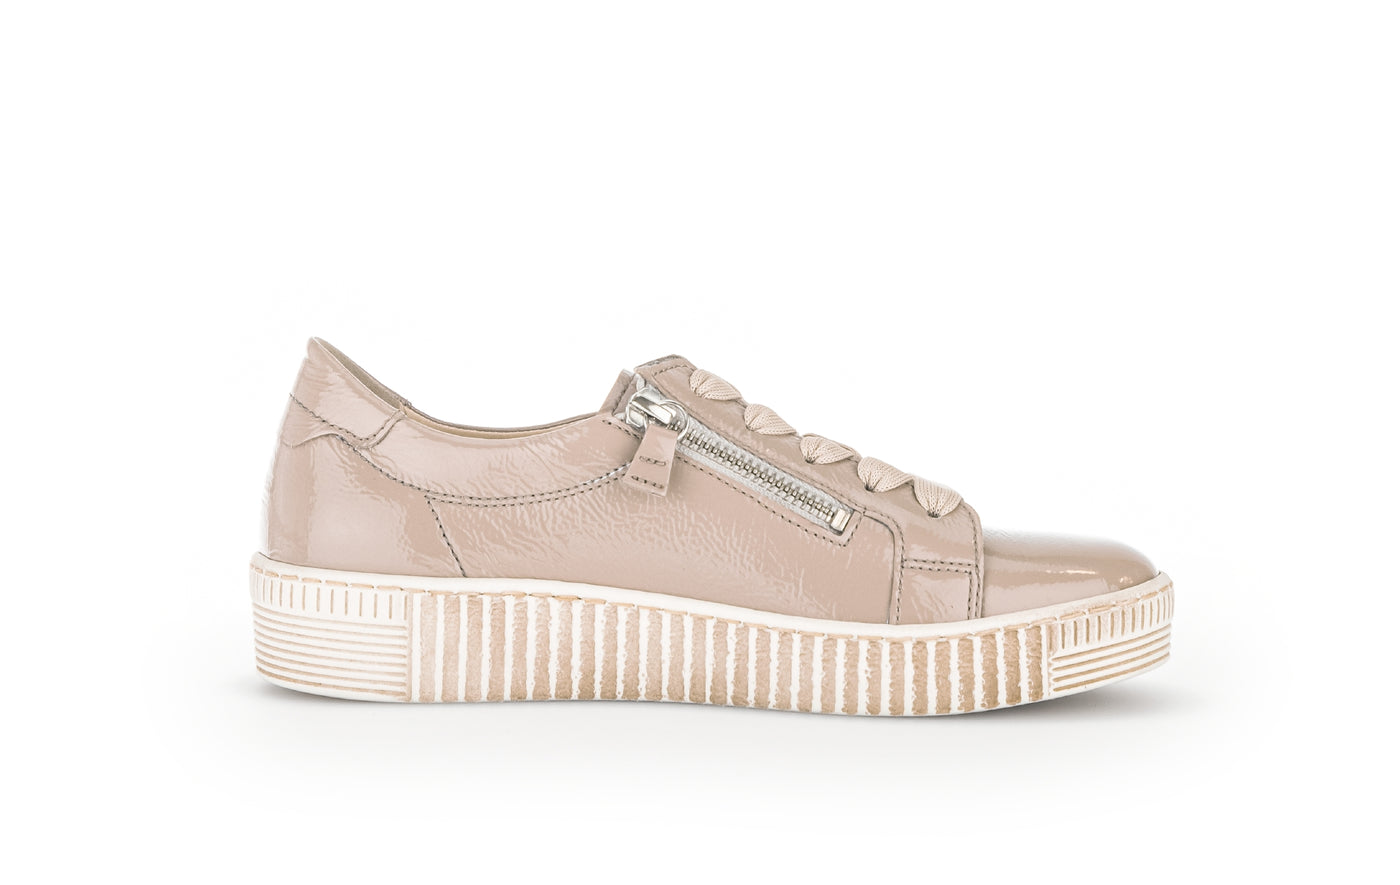 GABOR - 33.334.92 FLAT LACED FASHION SHOE WITH ZIP - BEIGE PATENT